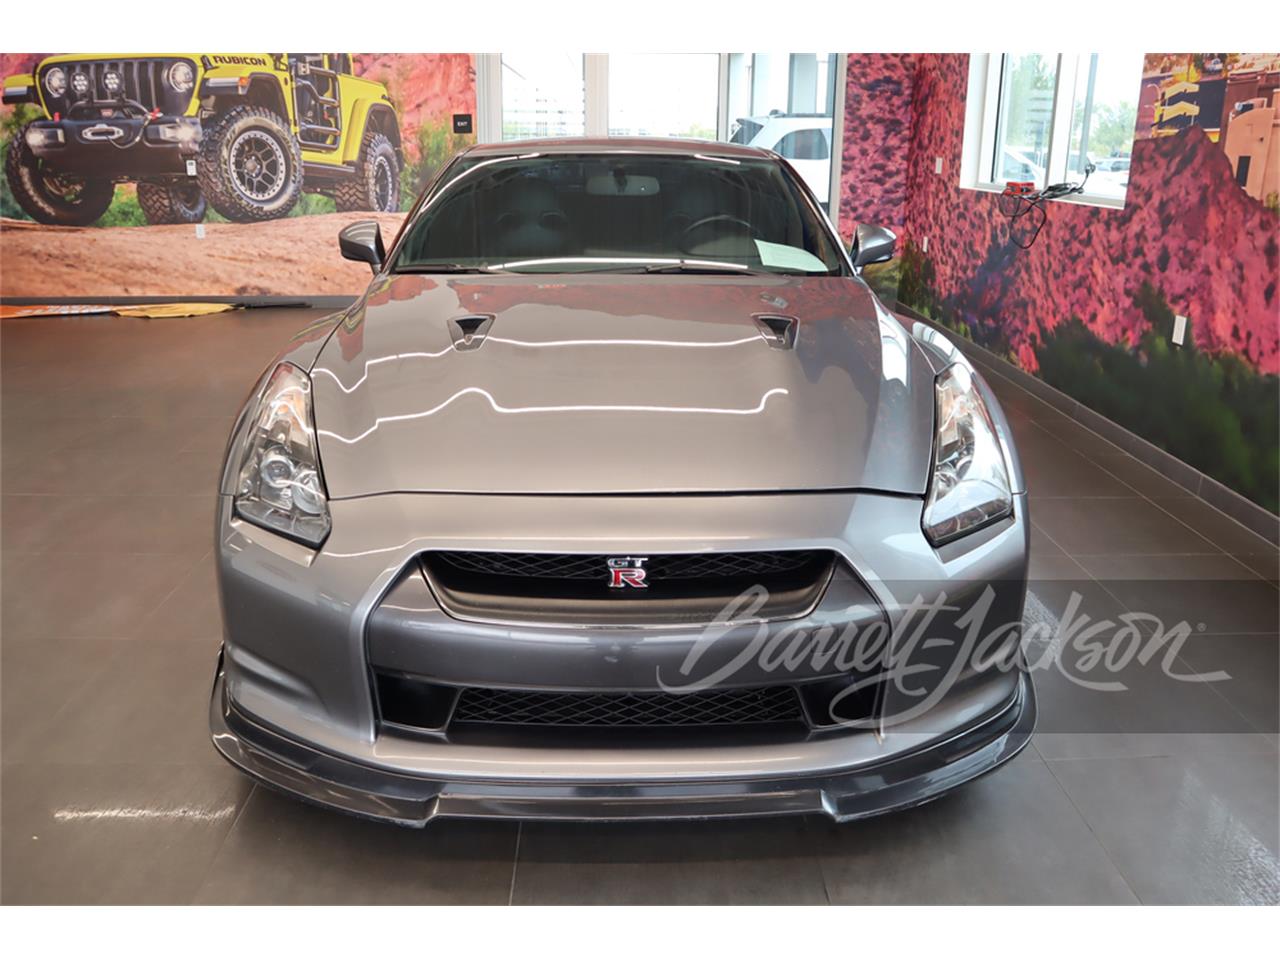 For Sale at Auction: 2009 Nissan GT-R in Scottsdale, Arizona for sale in Scottsdale, AZ